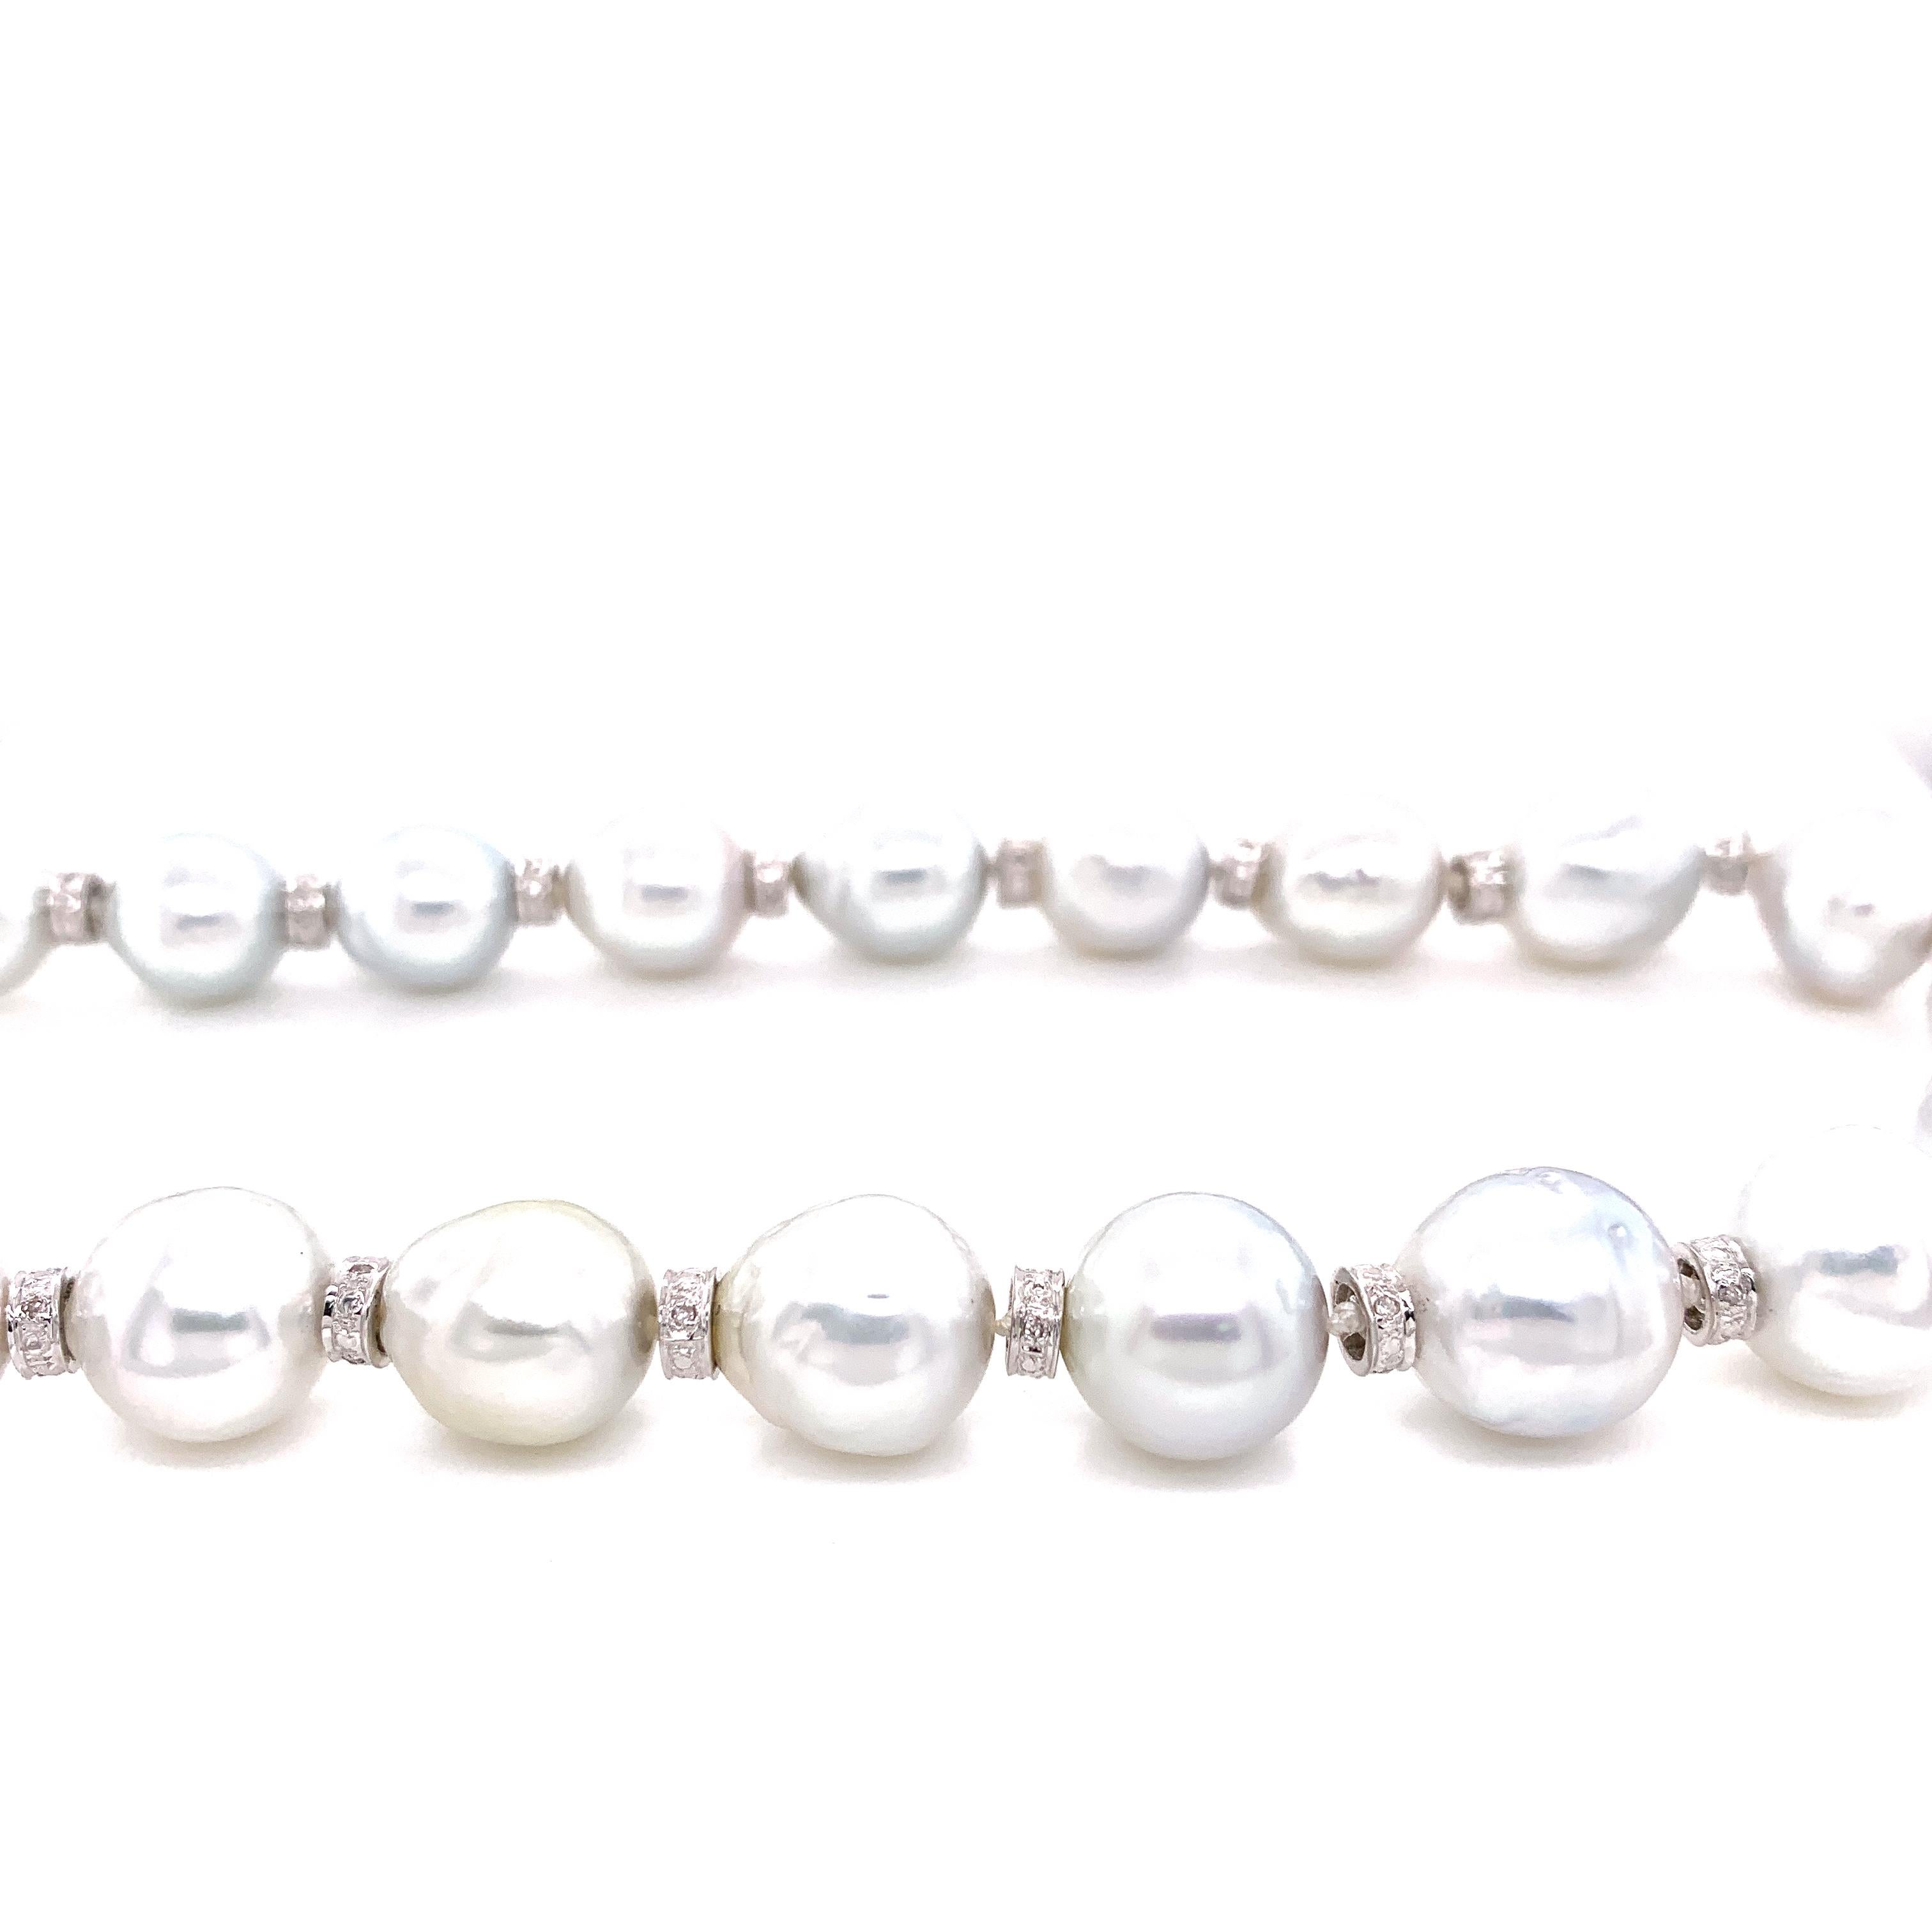 South Sea Pearls and White Diamond Clasp Gold Necklace :

An elegant necklace, it consists of a beautiful array of 35 white round South Sea pearls interspersed with 5mm diamond rondelles, and a designed white round brilliant diamond clasp. The South